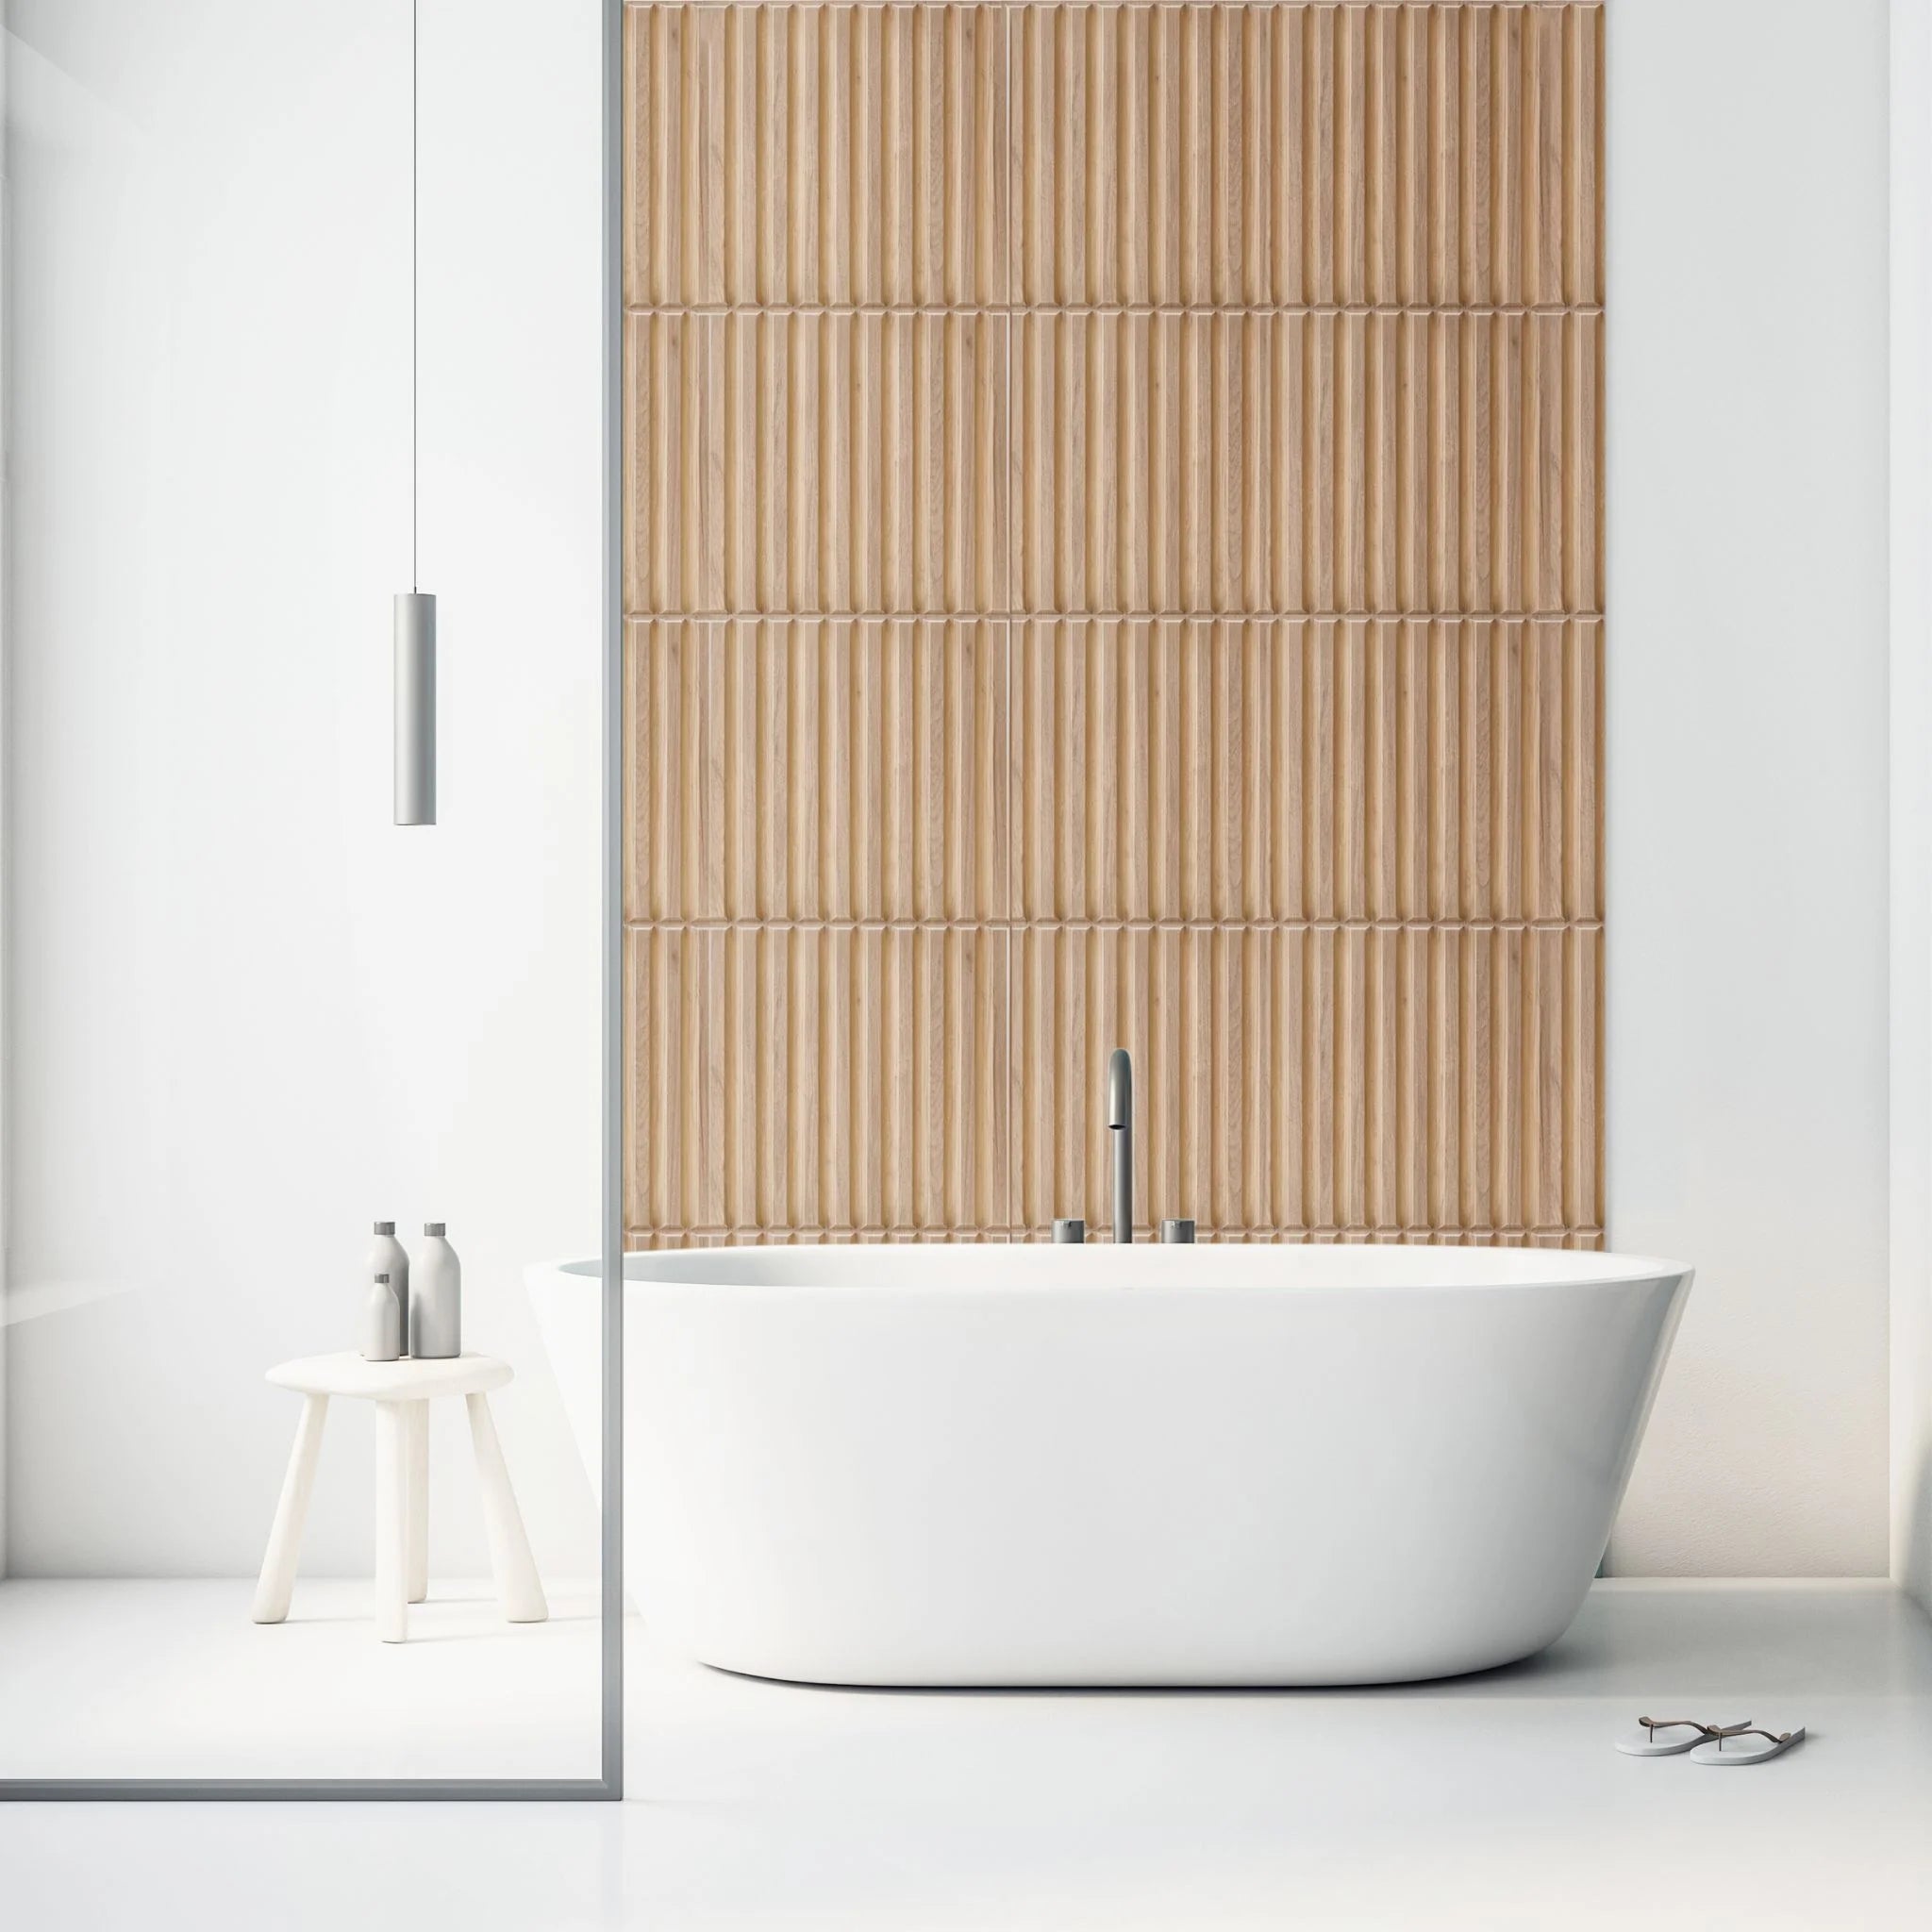 Wooden PVC wall panel with vertical lines in modern bathroom